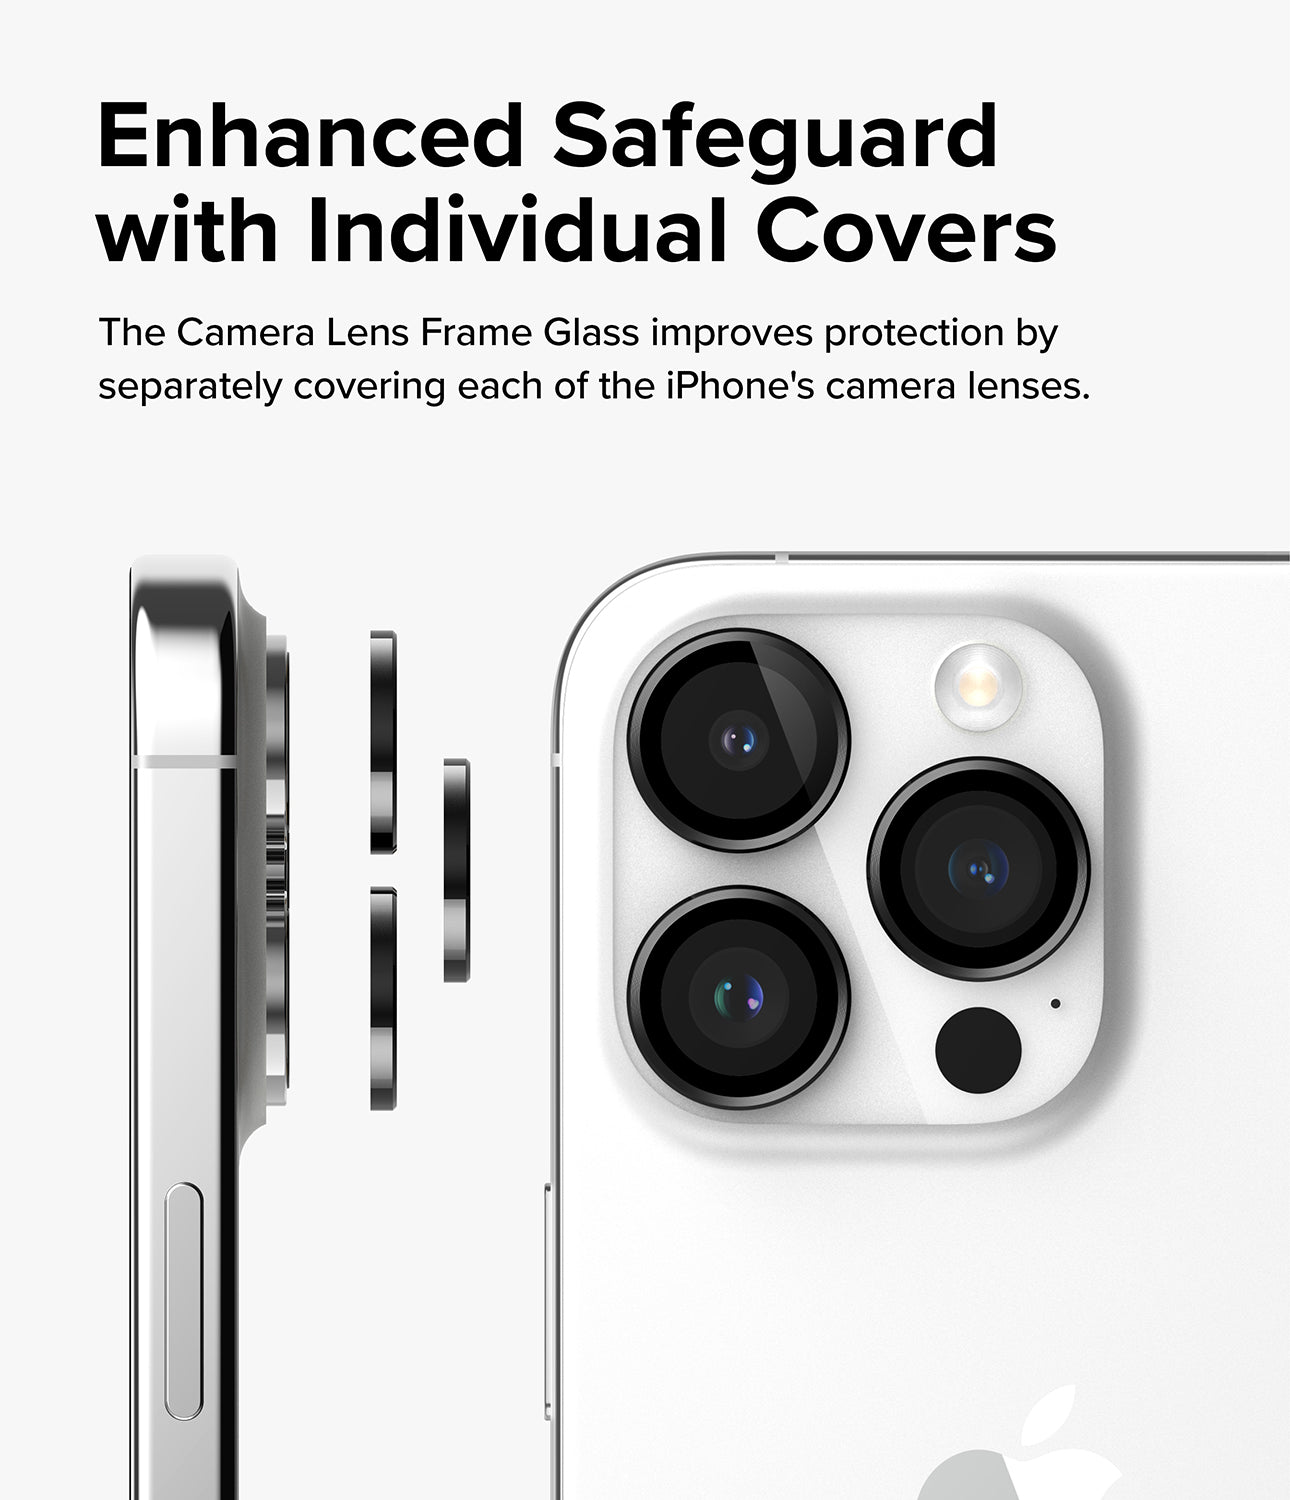 iPhone 15 Pro | Camera Lens Frame Glass - Enhanced Safeguard with Individual Covers. The Camera Lens Frame Glass improved protection by separately covering each of the iPhone's camera lenses.